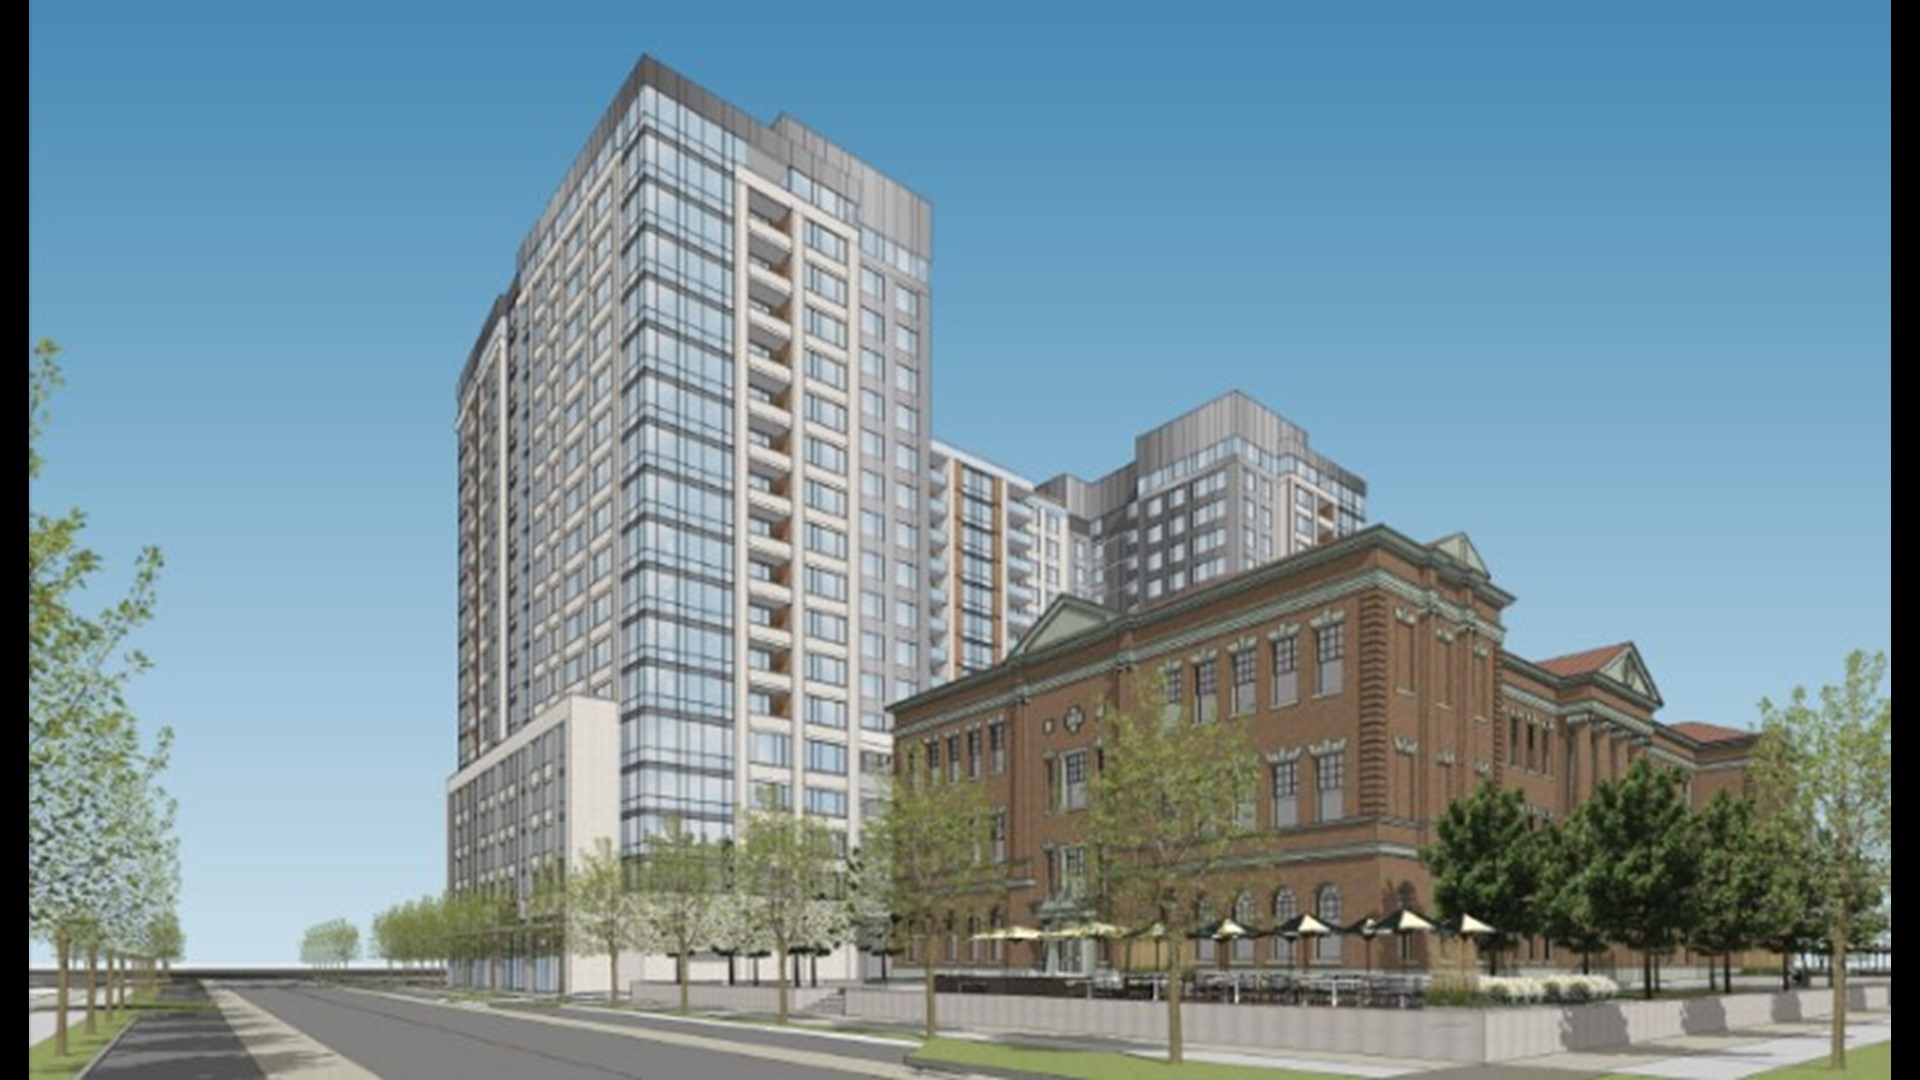 LMC has plans for a 19-story, 479-unit apartment project on the parking lot sites, according to site plans filed with the city earlier this year.